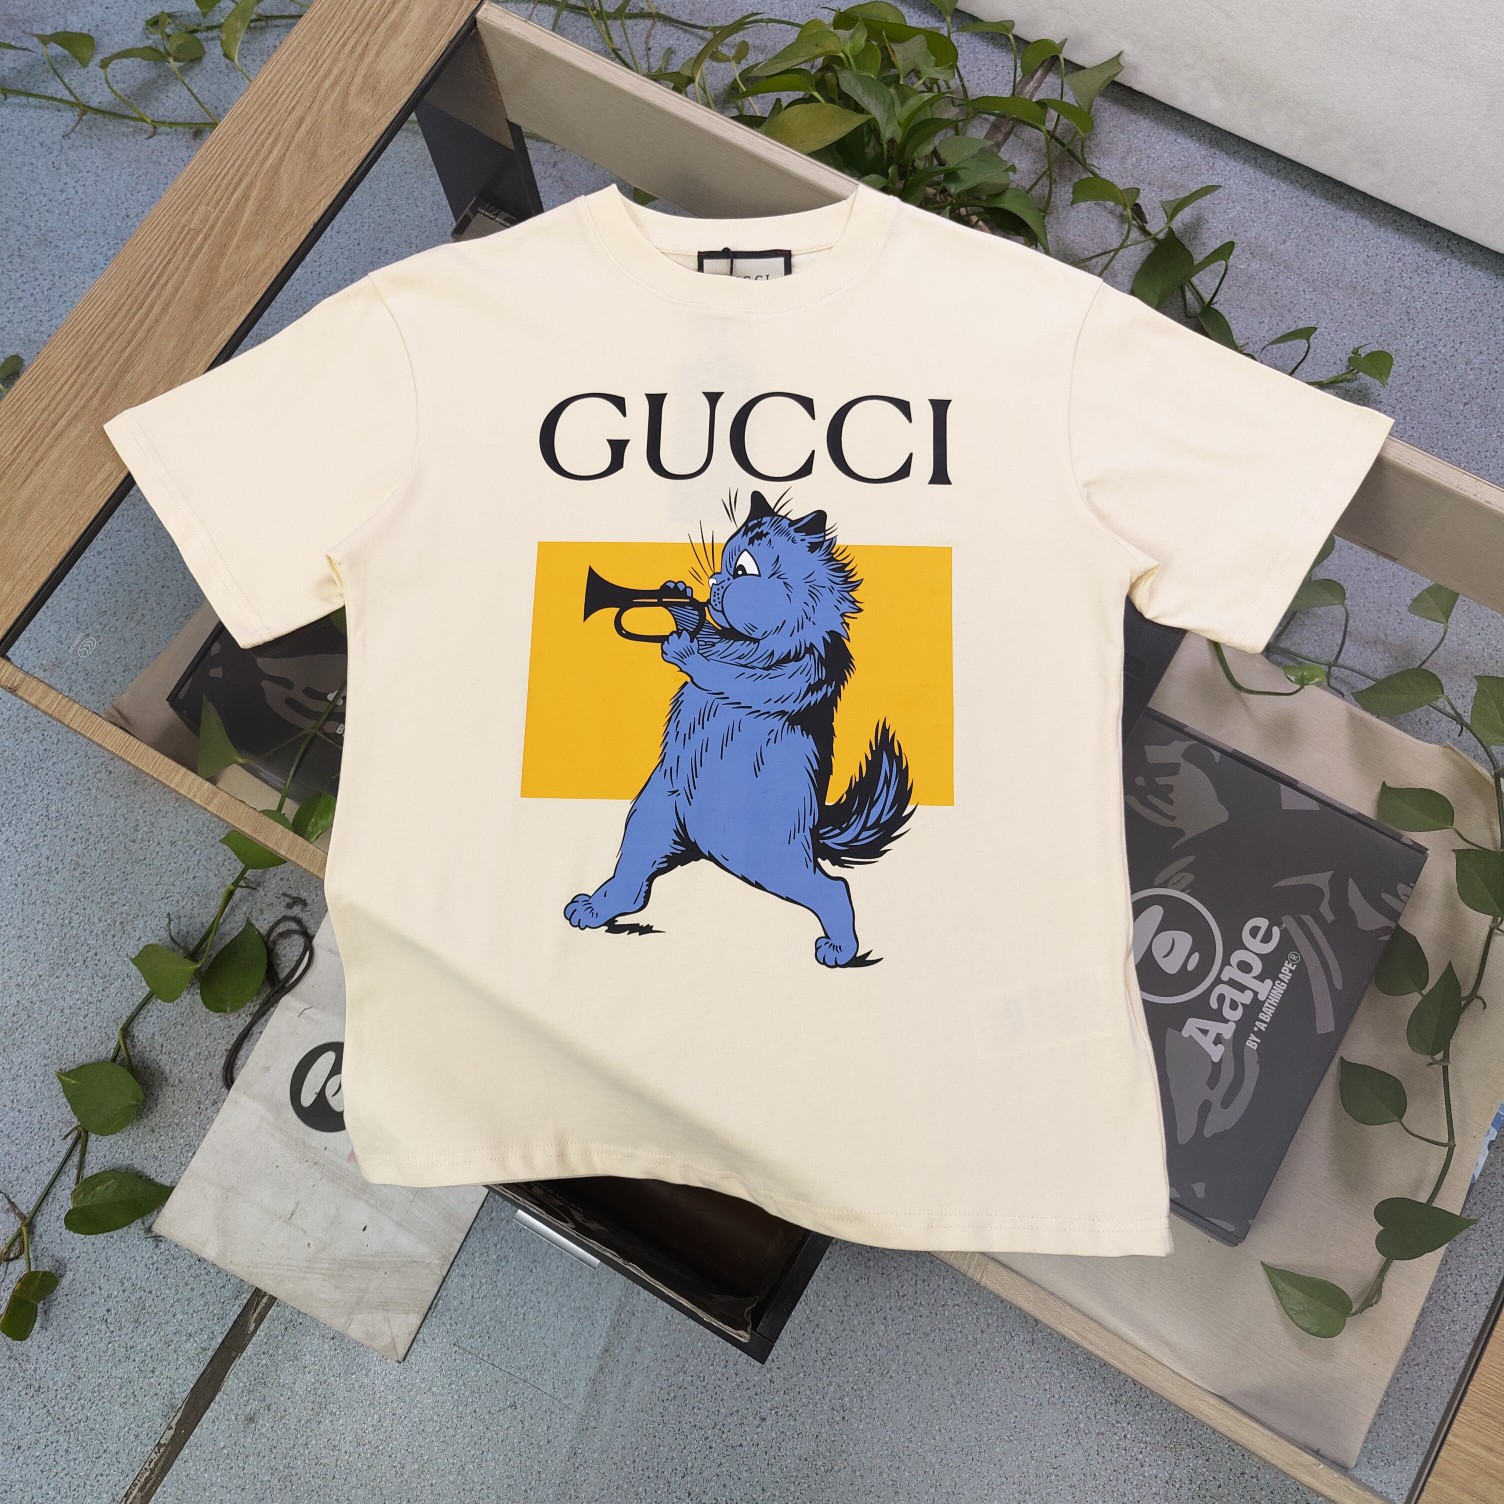 Gucci Clothing T-Shirt Apricot Color Black Blue Printing Unisex Cotton Spring/Summer Collection Vintage Short Sleeve XD99080